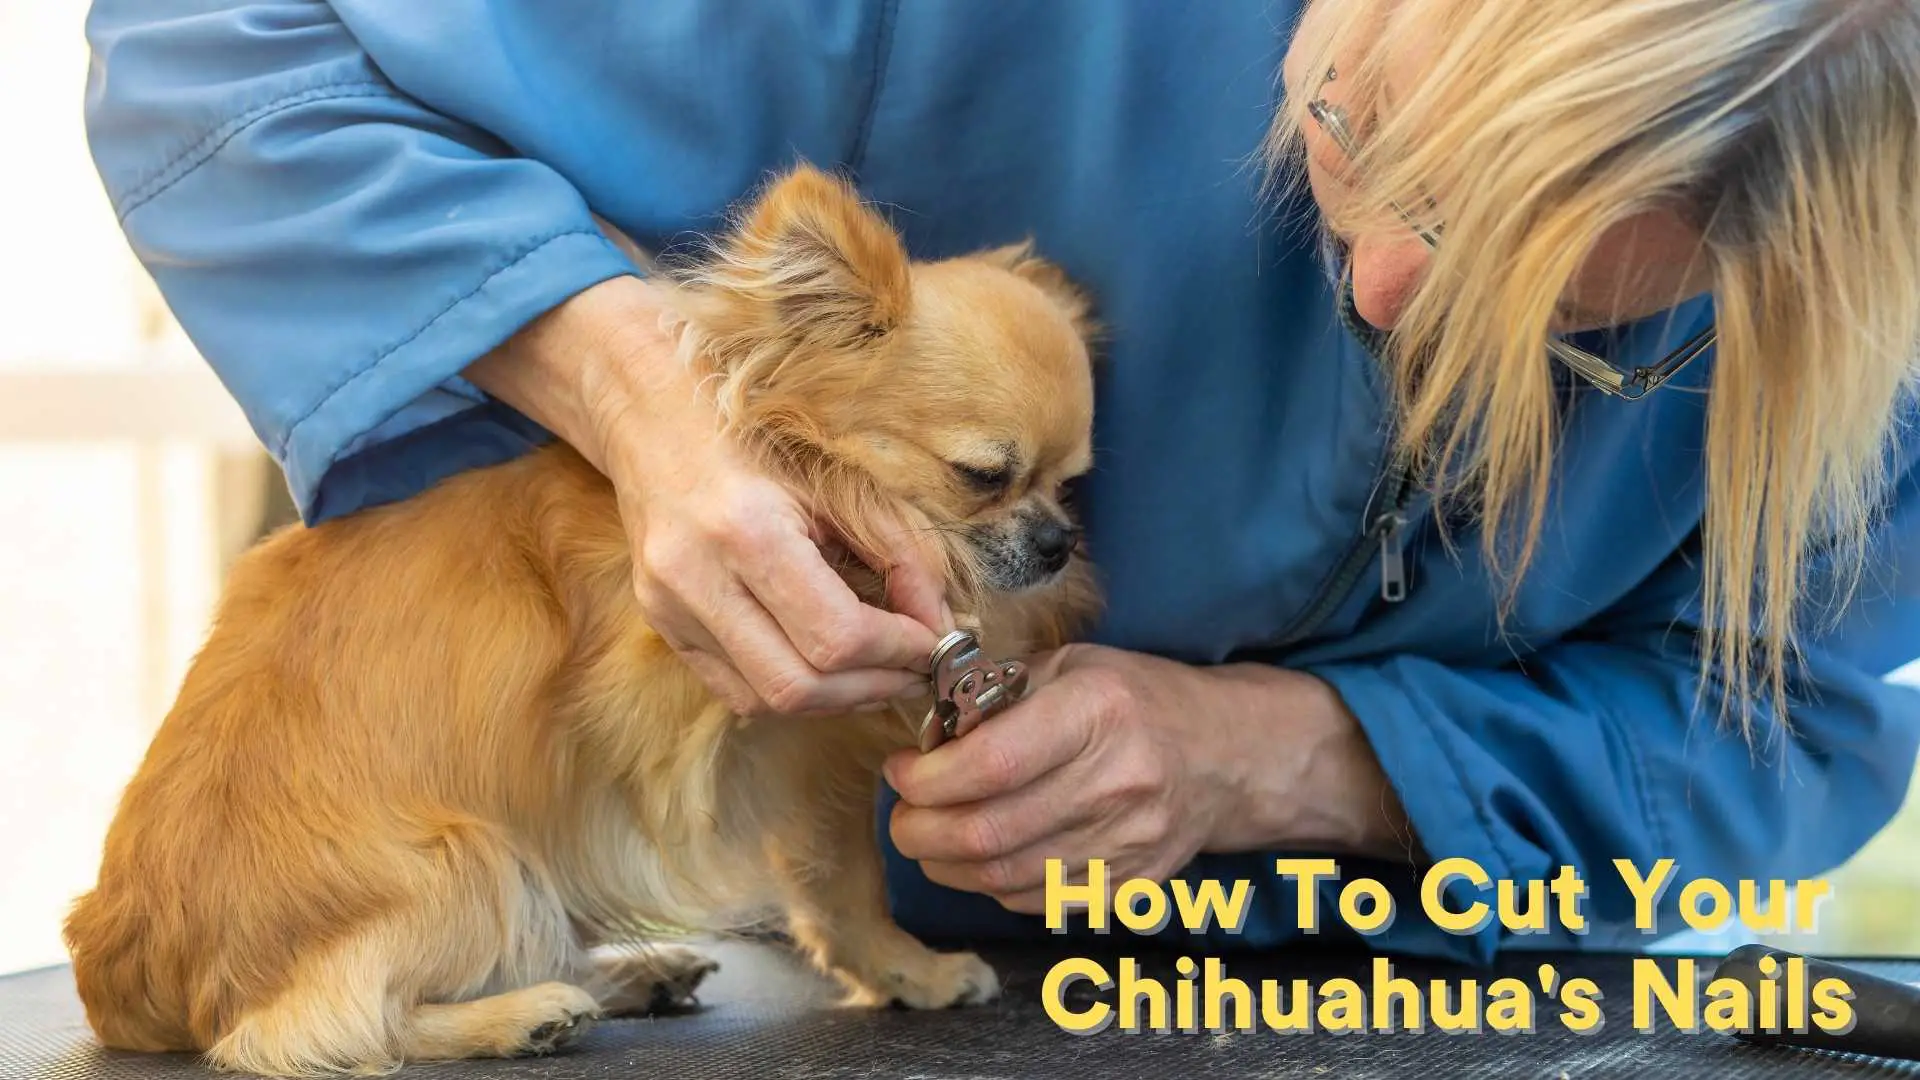 How To Cut Your Chihuahua's Nails